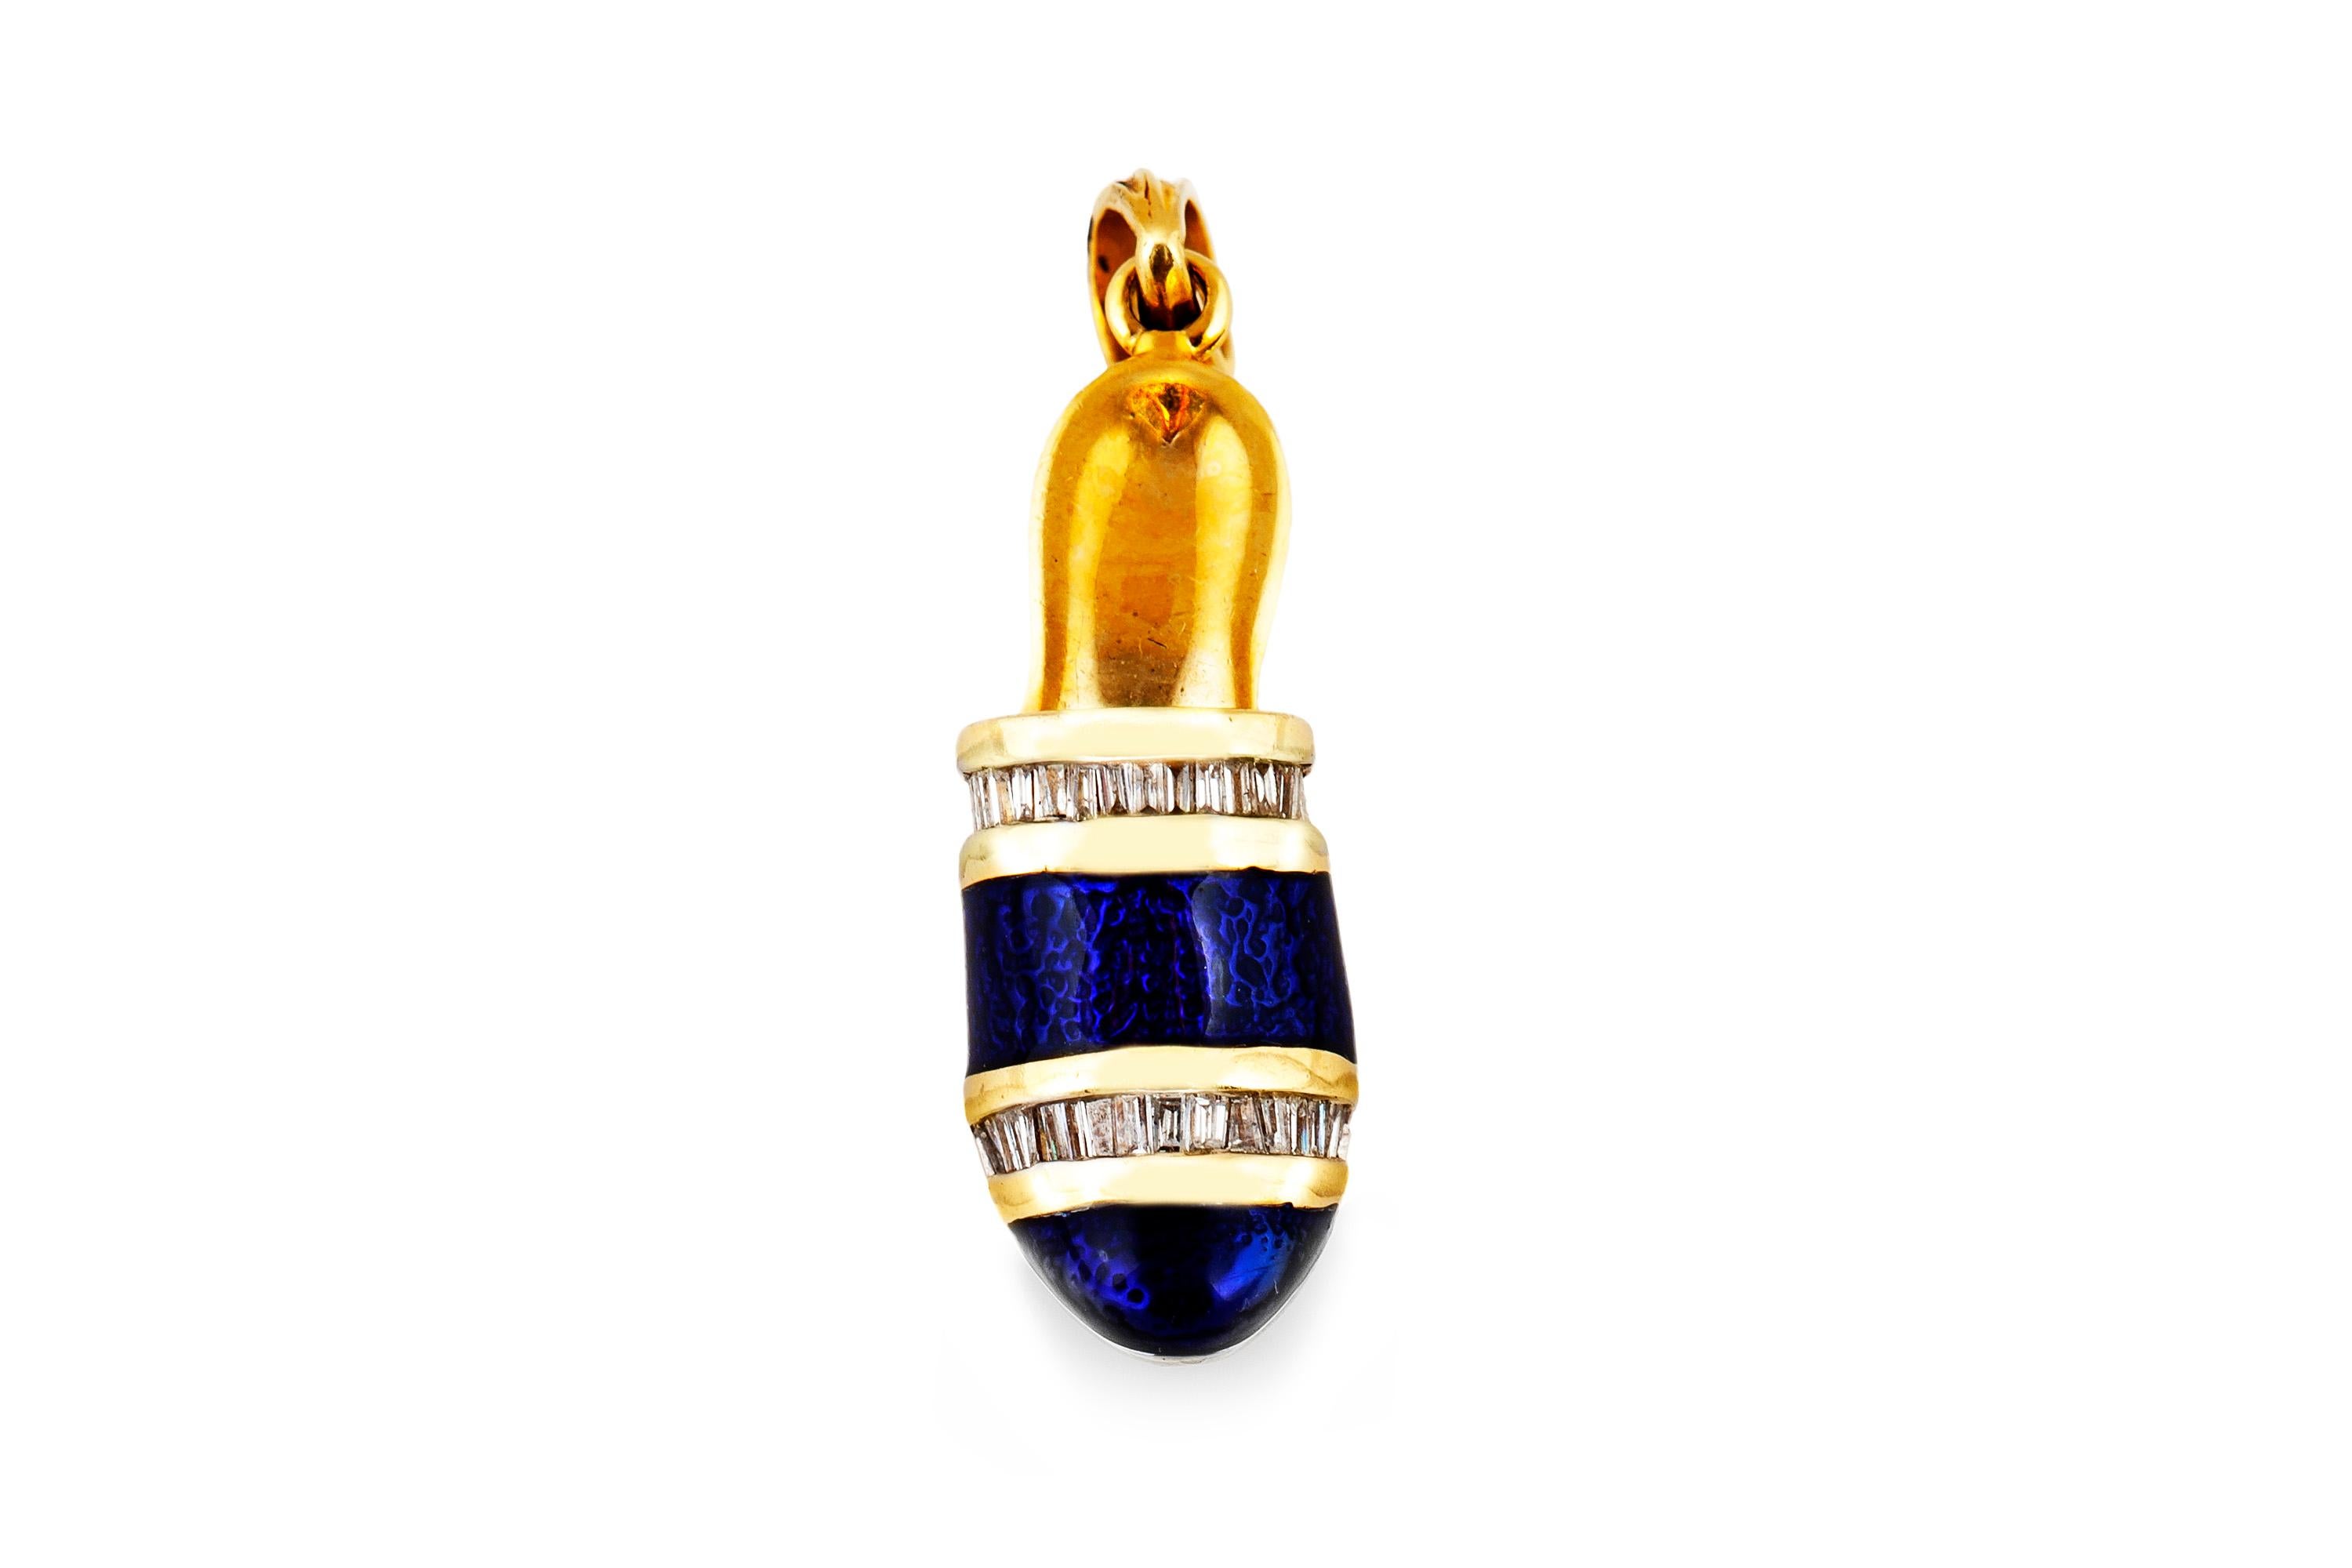 The pendant is finely crafted in 14k yellow gold with blue enamel and diamonds weighing approximately total of 0.30.
Circa 2000